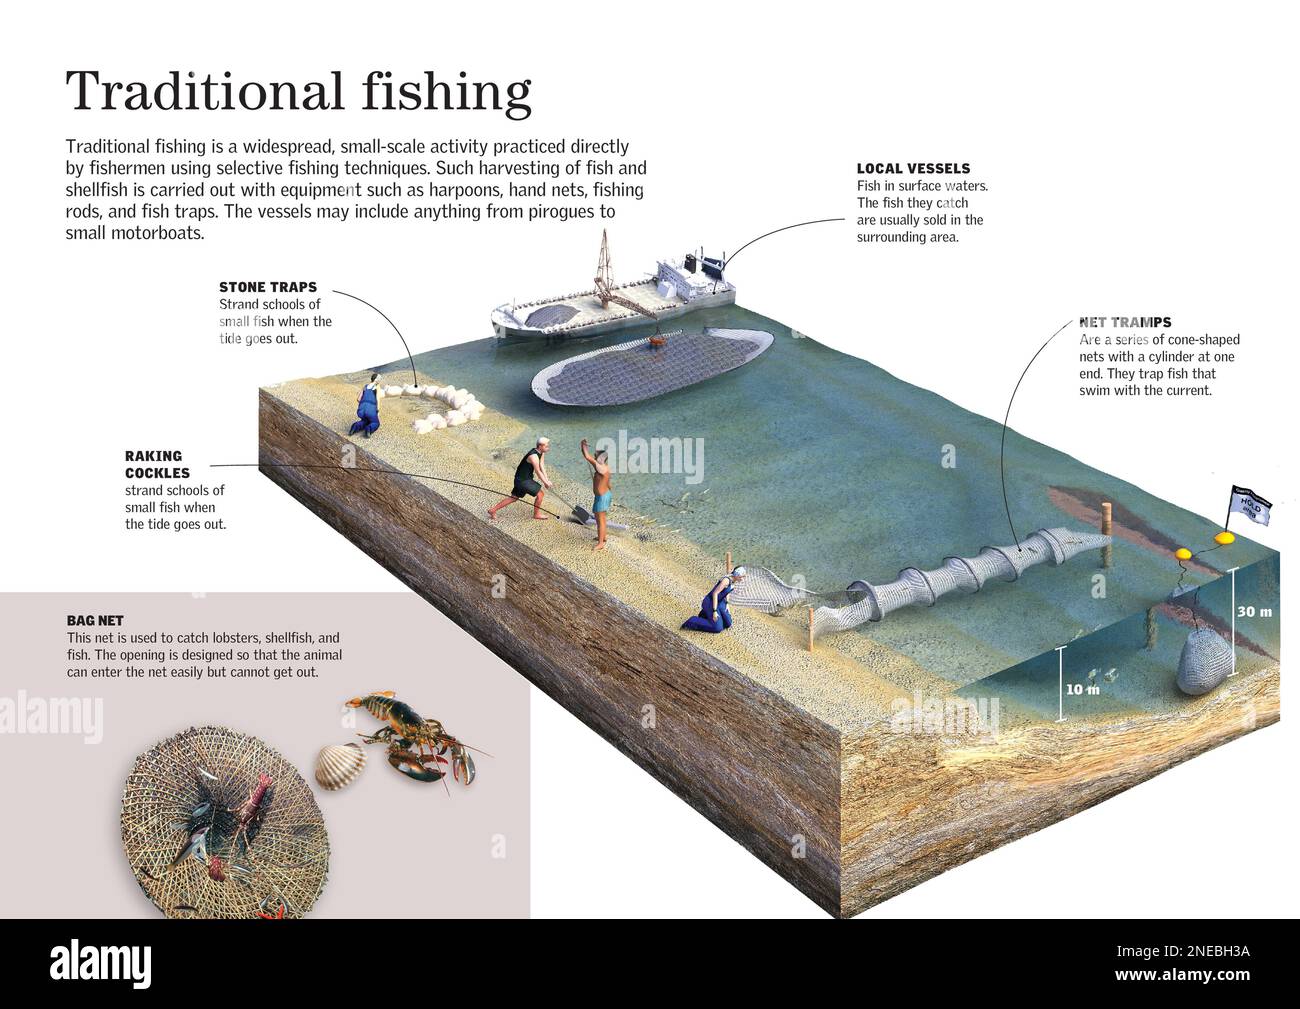 Infographic about the art of artisan fishing, that is, low scale